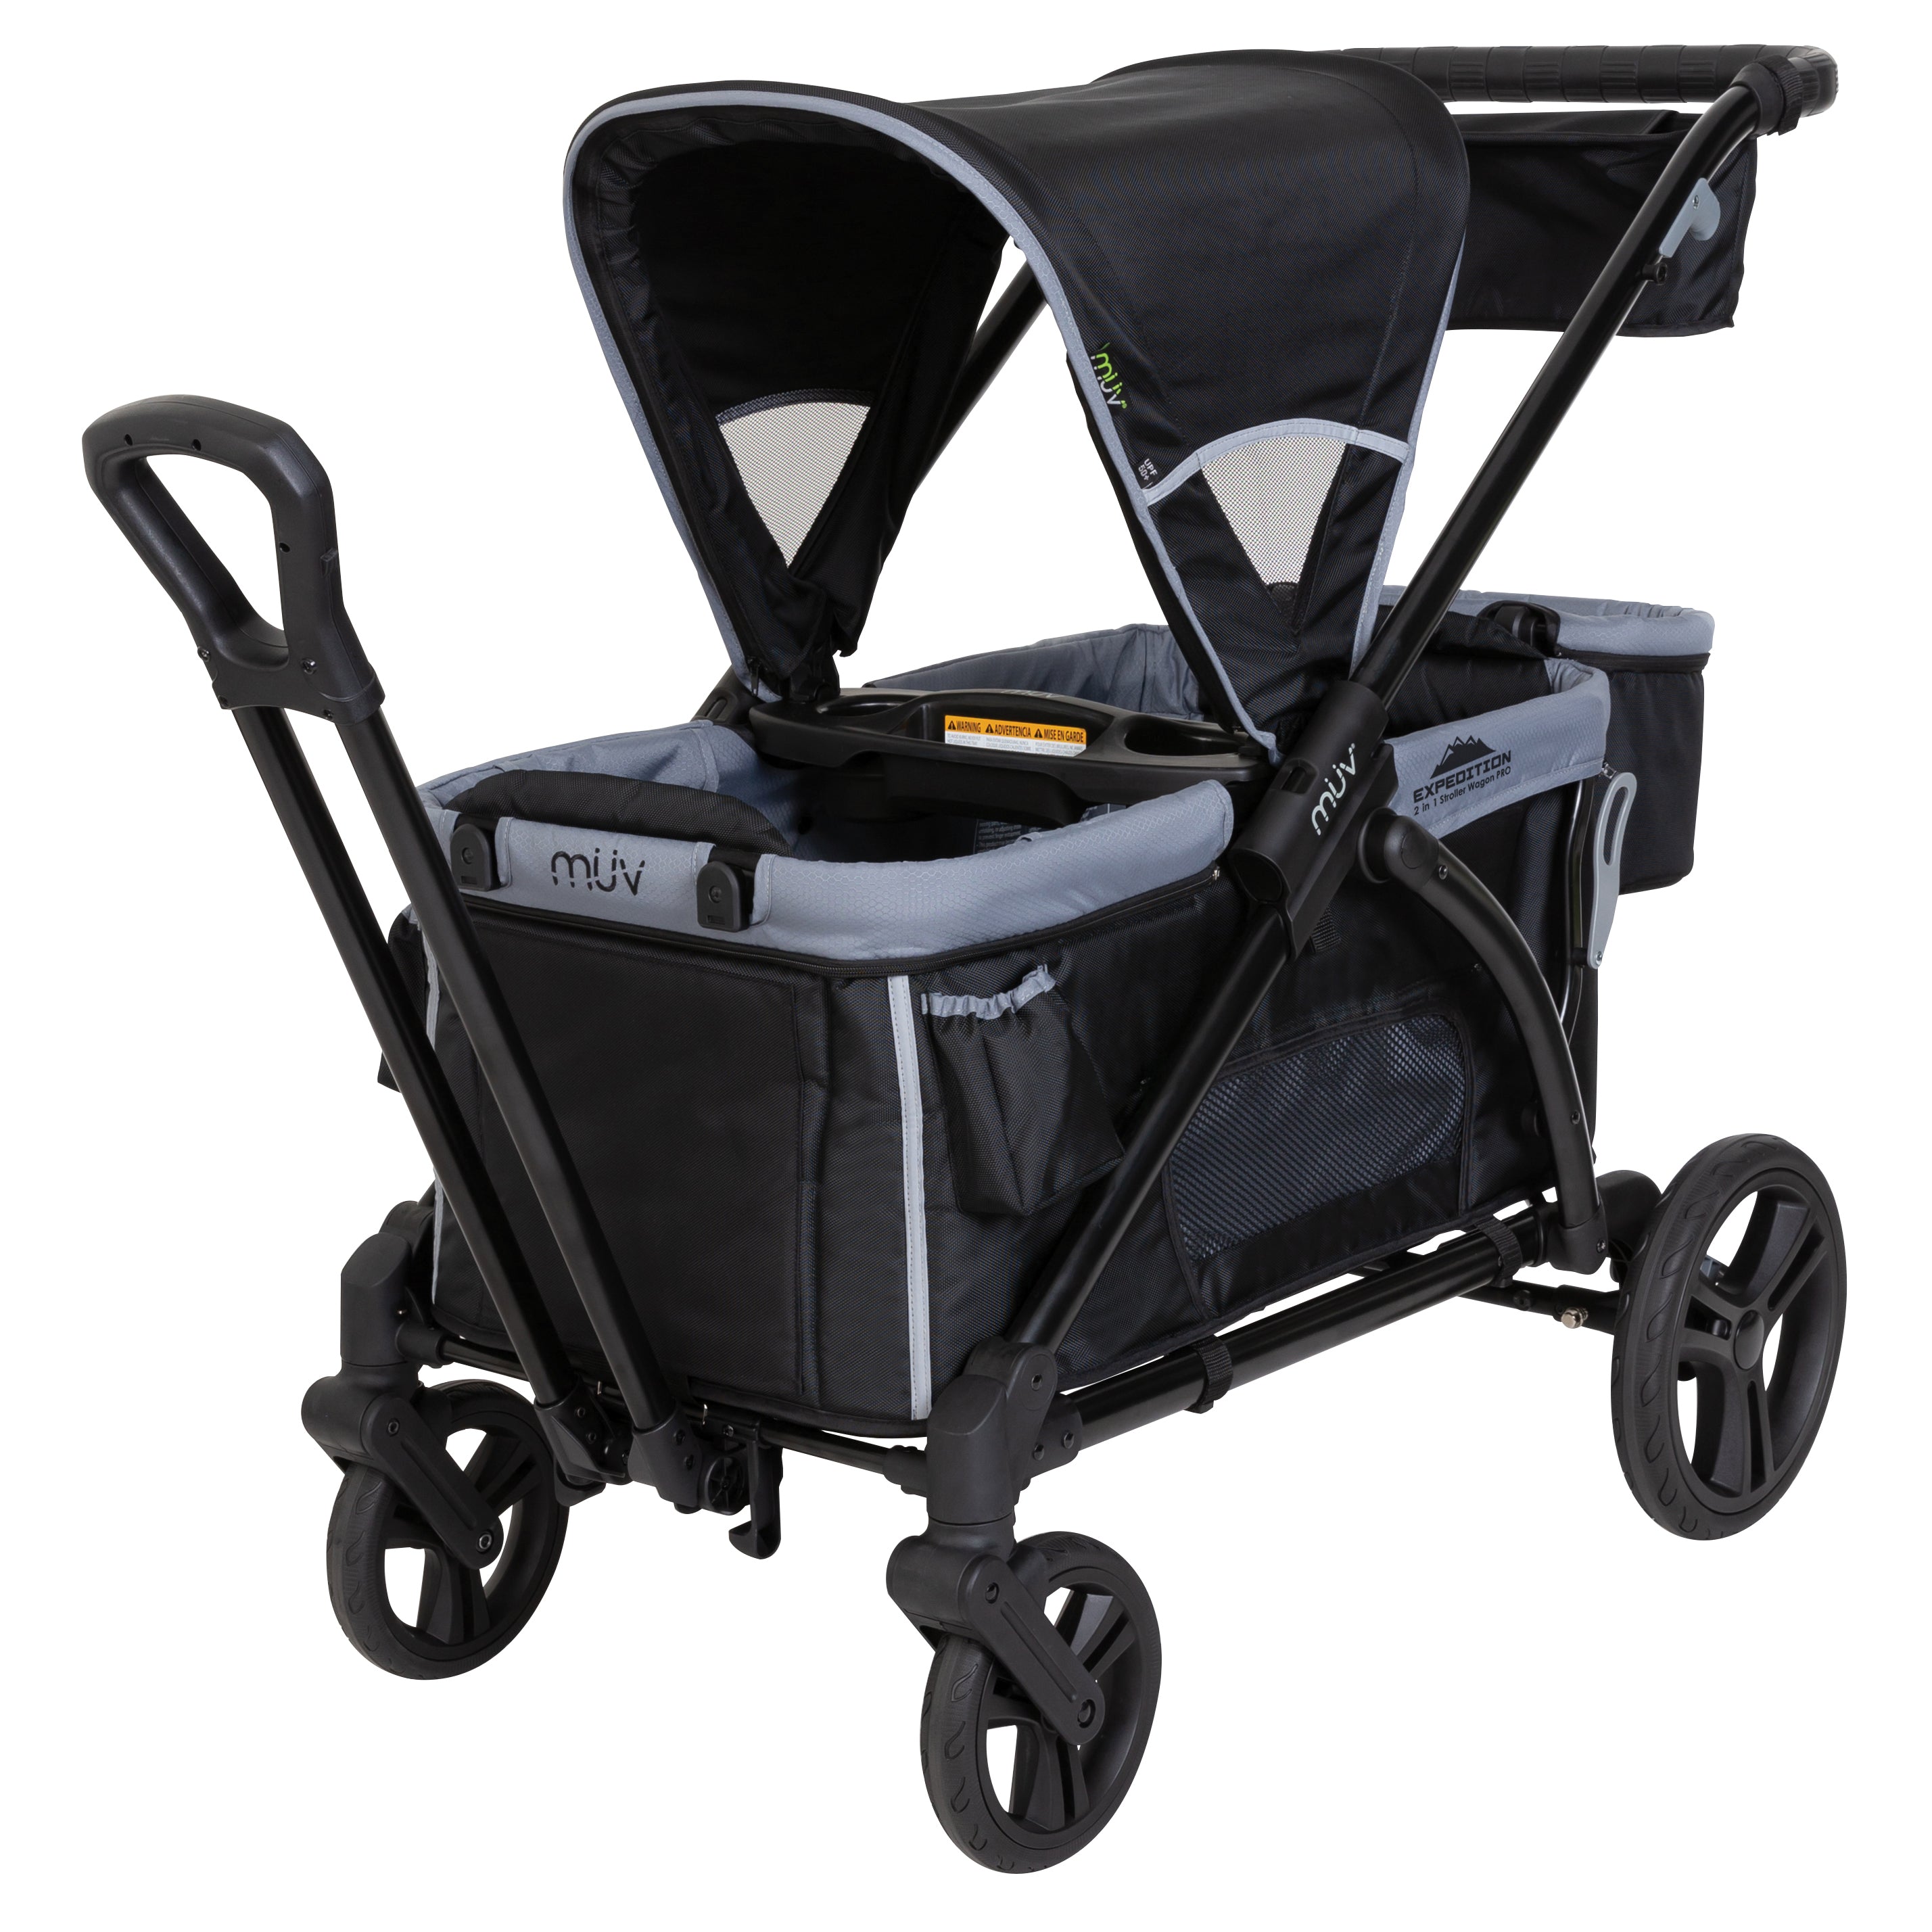 New Double baby stroller trolley car portable folding stroller two